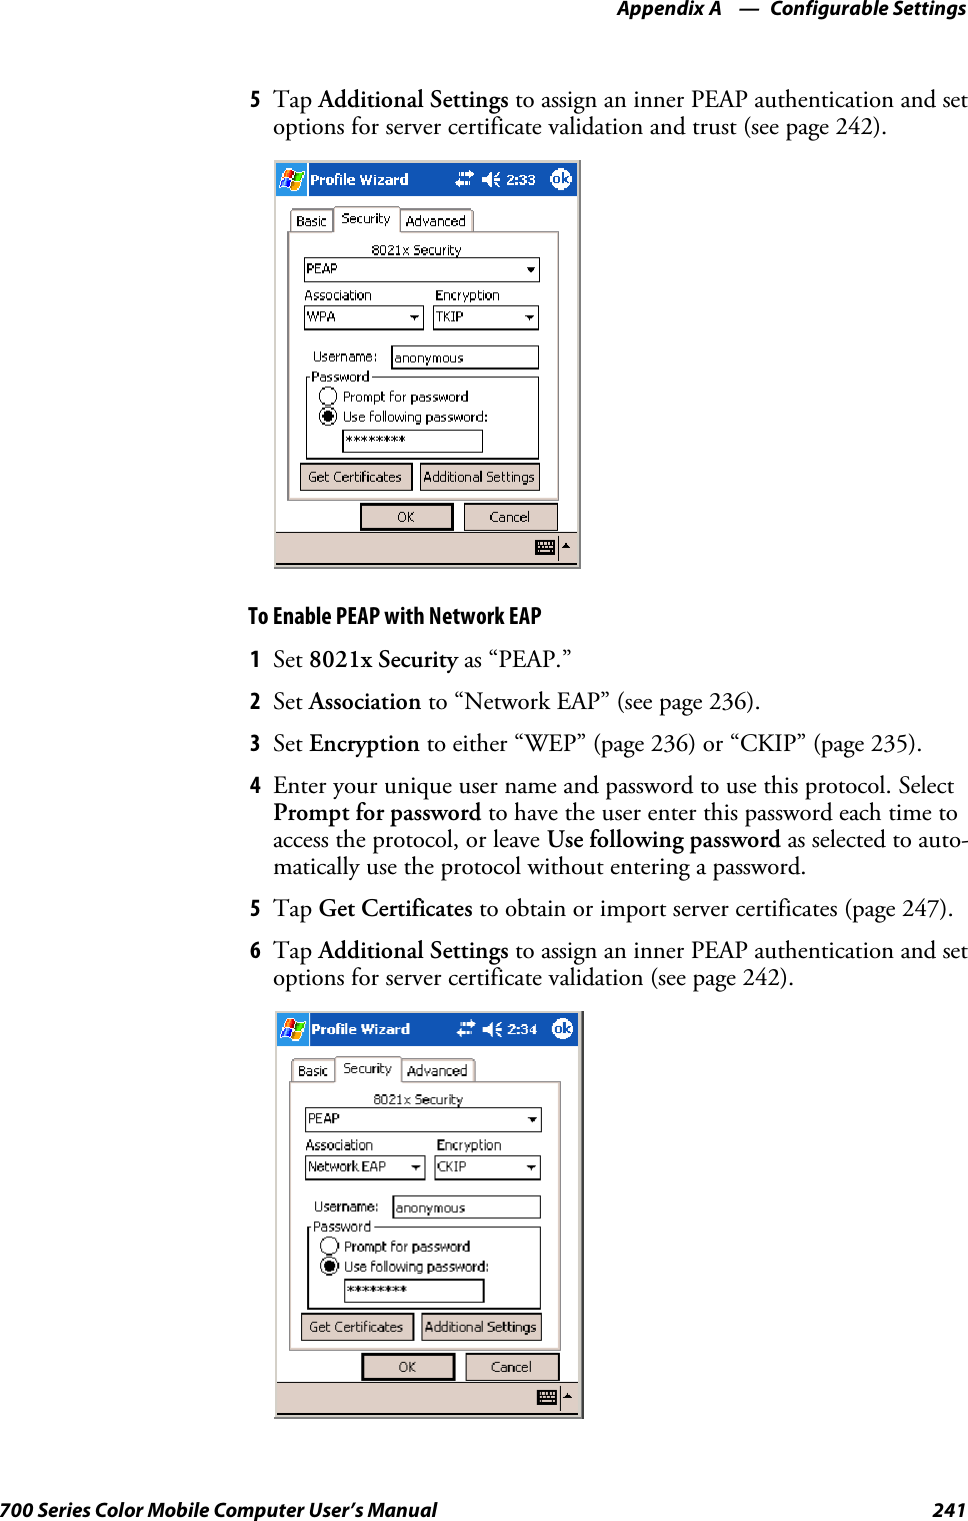 Configurable SettingsAppendix —A241700 Series Color Mobile Computer User’s Manual5Tap Additional Settings to assign an inner PEAP authentication and setoptions for server certificate validation and trust (see page 242).To Enable PEAP with Network EAP1Set 8021x Security as “PEAP.”2Set Association to “Network EAP” (see page 236).3Set Encryption to either “WEP” (page 236) or “CKIP” (page 235).4Enter your unique user name and password to use this protocol. SelectPrompt for password to have the user enter this password each time toaccess the protocol, or leave Use following password as selected to auto-matically use the protocol without entering a password.5Tap Get Certificates to obtain or import server certificates (page 247).6Tap Additional Settings to assign an inner PEAP authentication and setoptions for server certificate validation (see page 242).